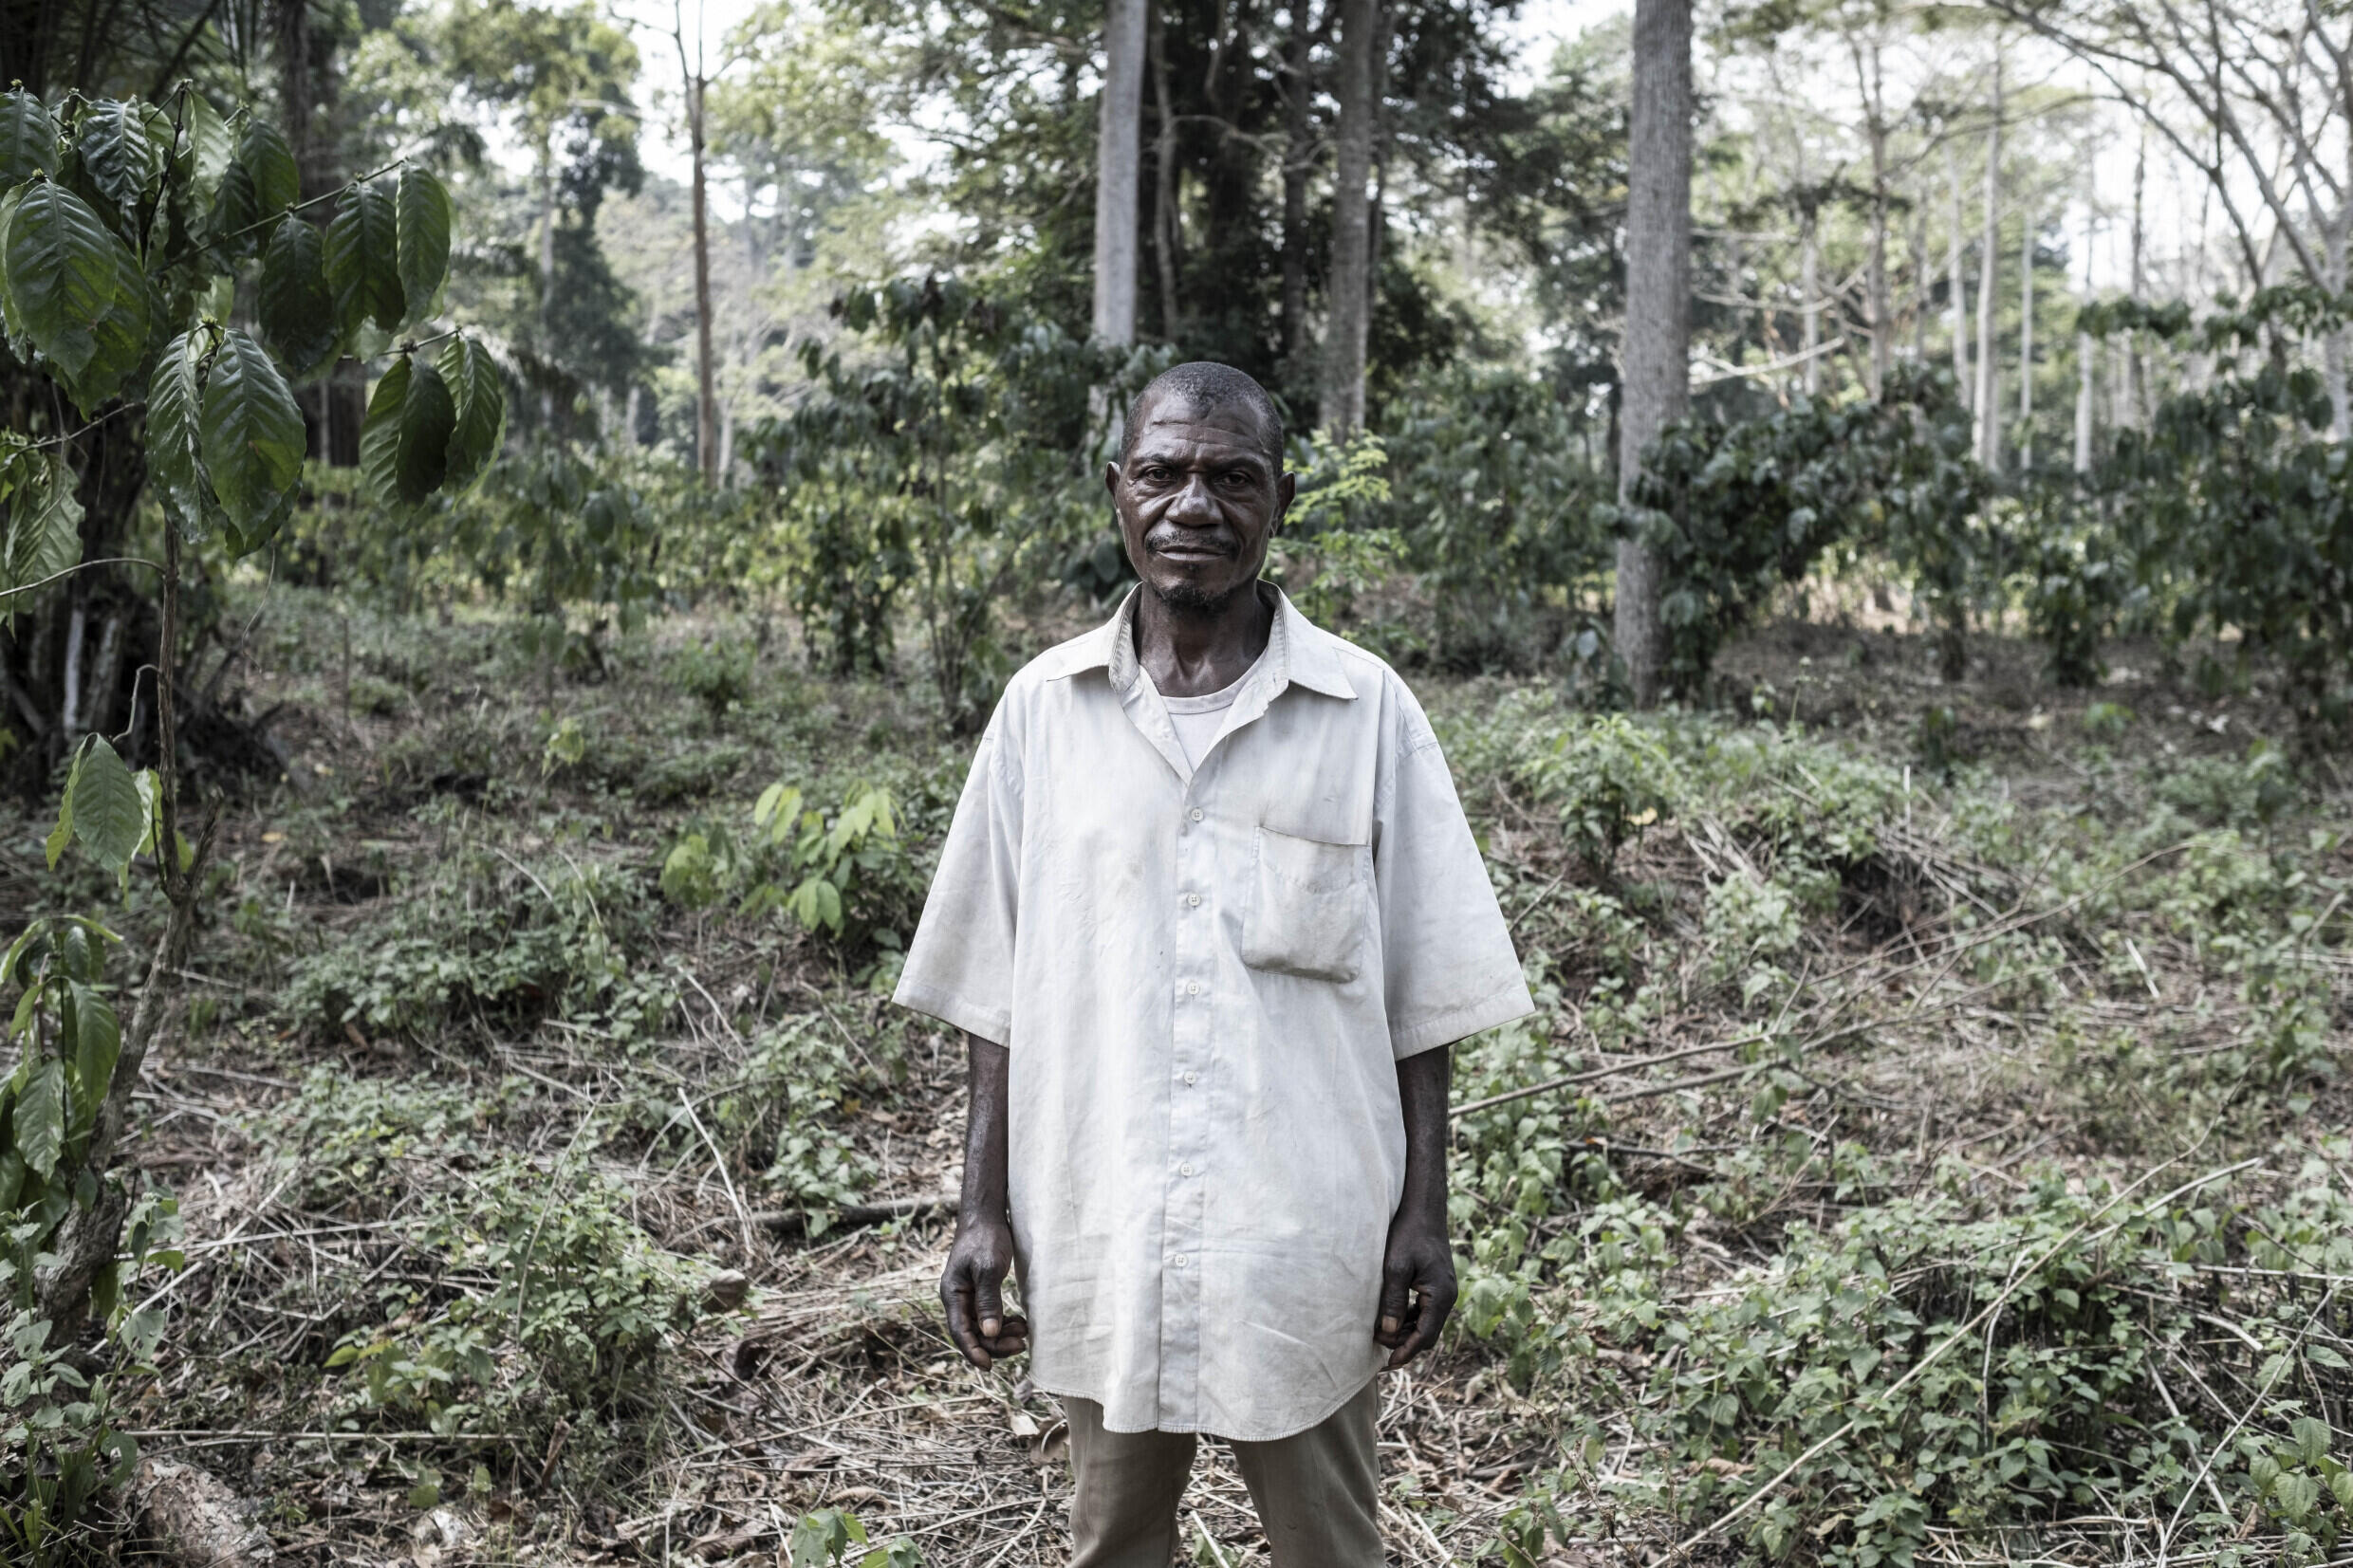 Eugene Omokami, an Aka Pygmy, poses for a portrait in a deforested area of Mbata, in the Lobaye region of southwestern Central Africa, on January 24, 2023.